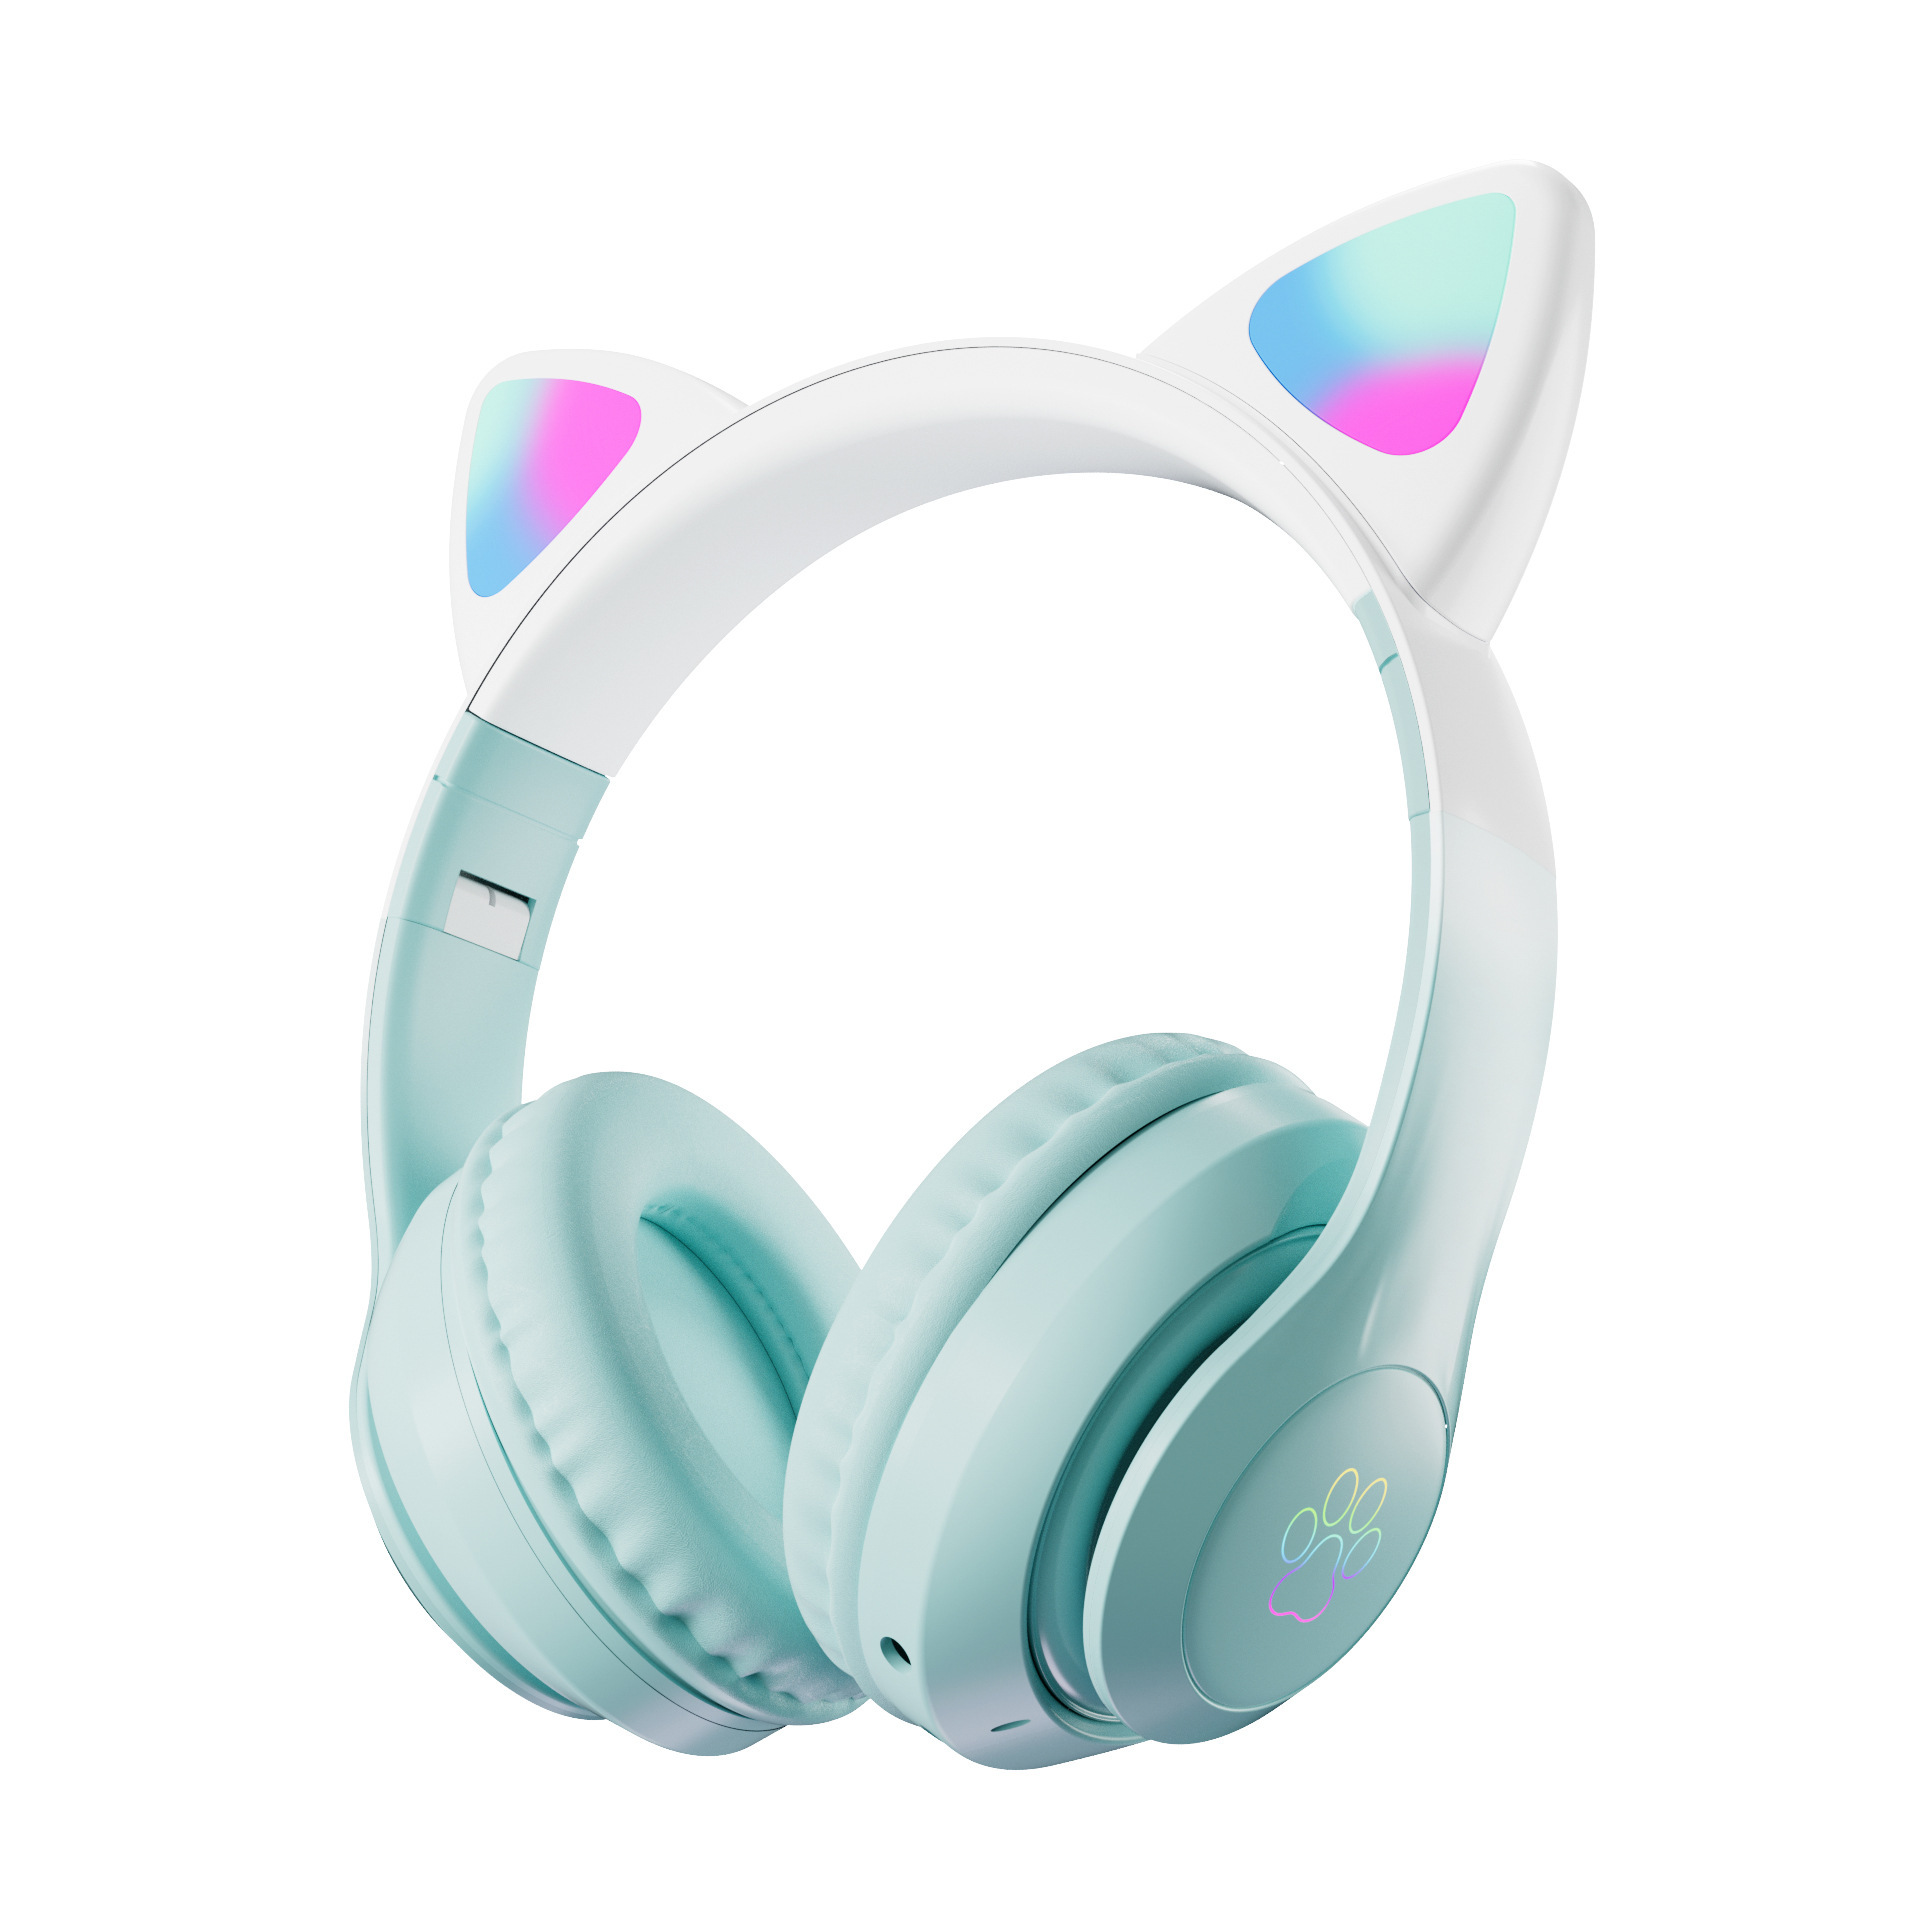 STN-28PRO New Gradient Color Craft Wireless Cat Ear Bluetooth Adorable Colorful Dazzling Light Headset